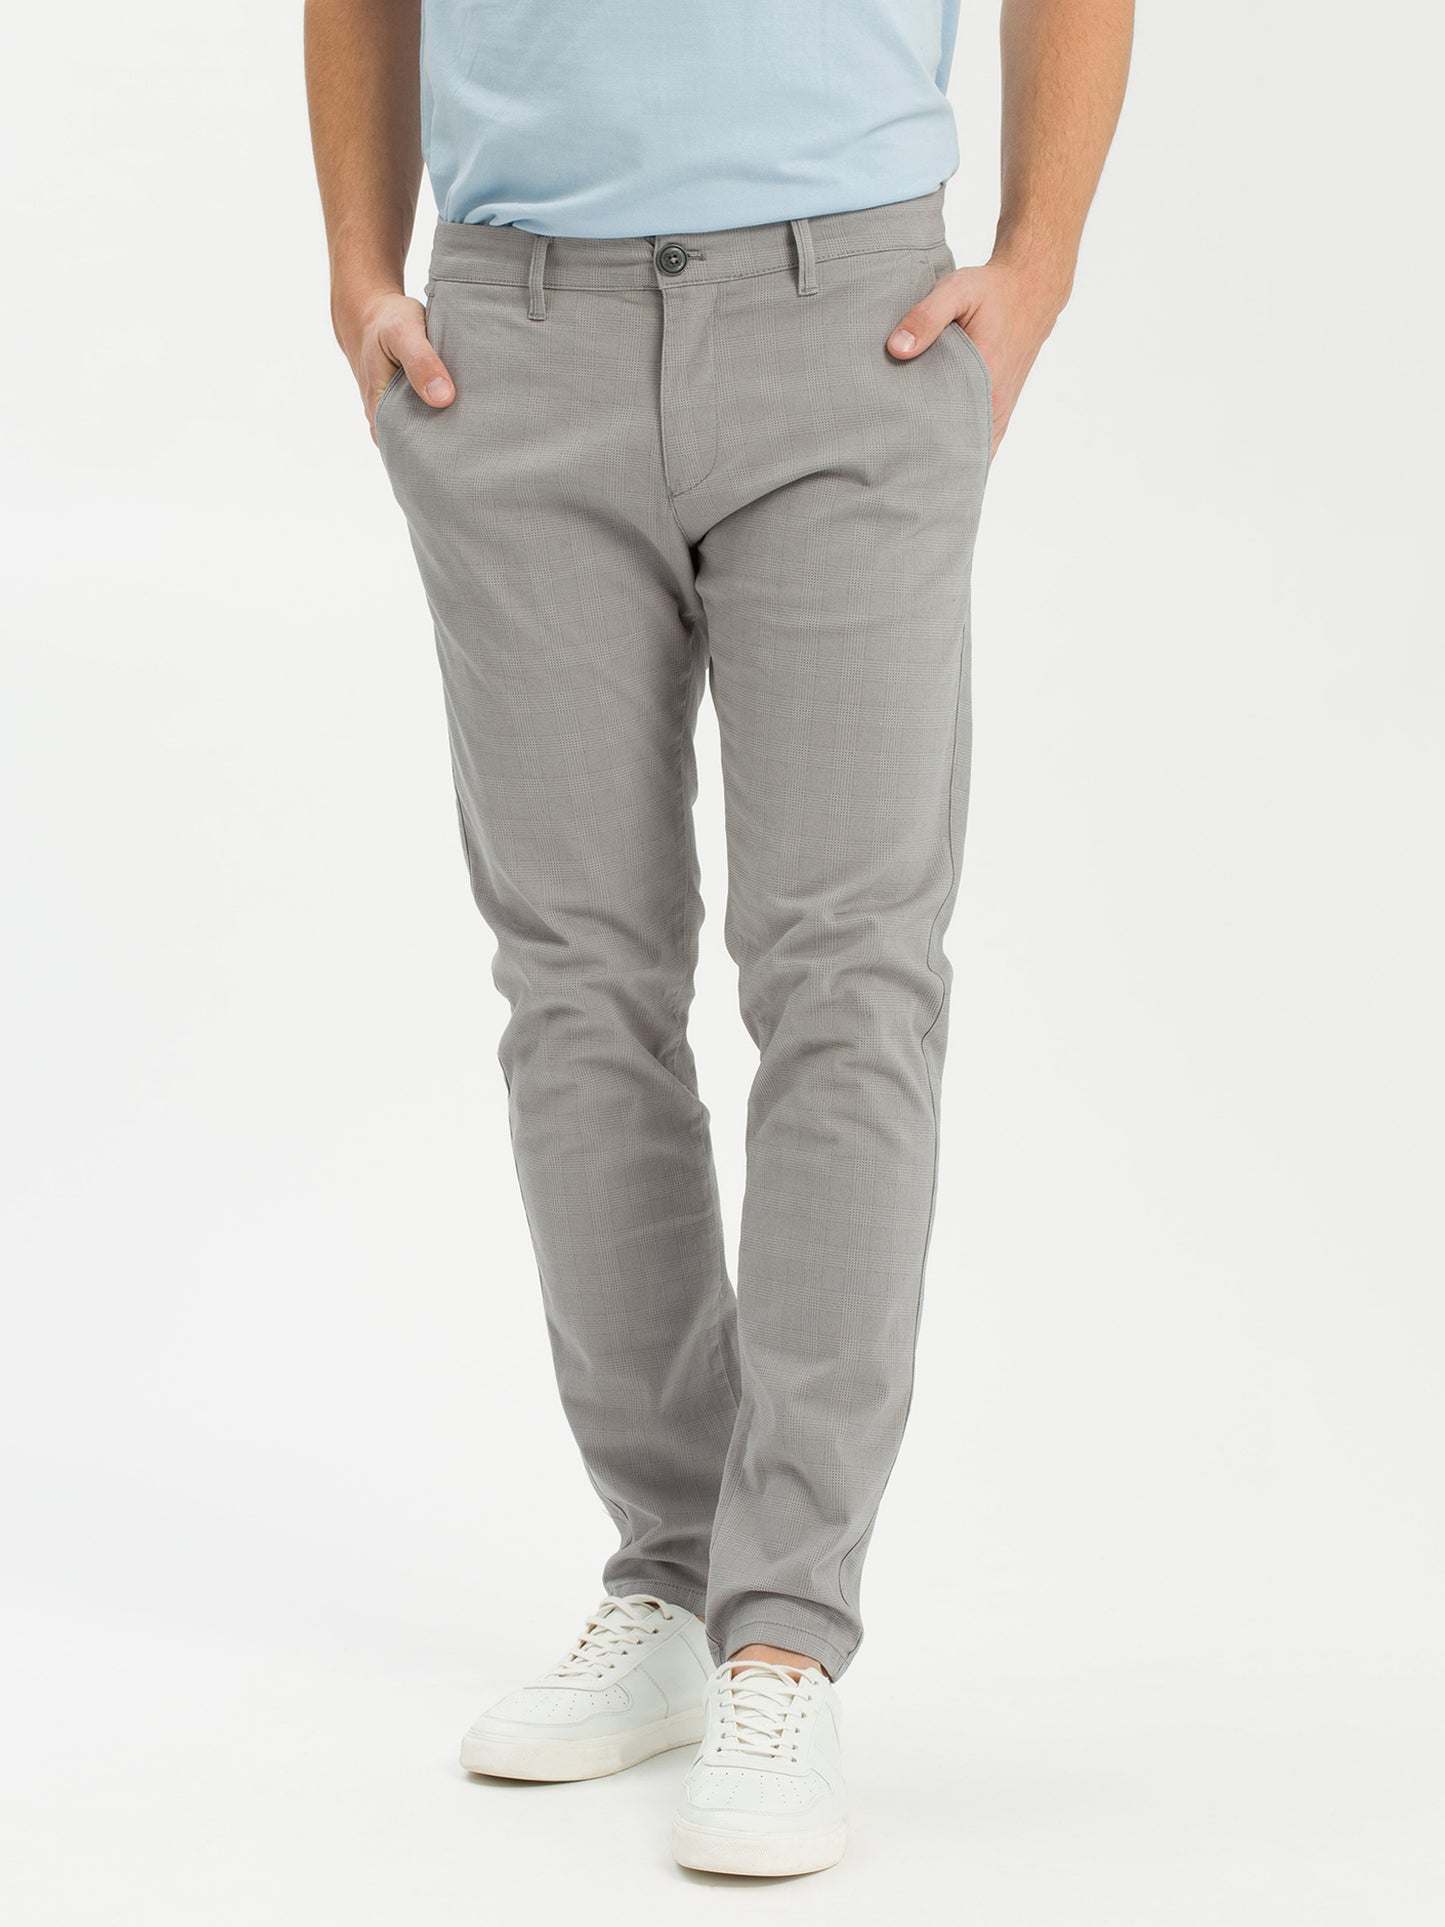 Men's Chino Slim Tapered Fit grey checked